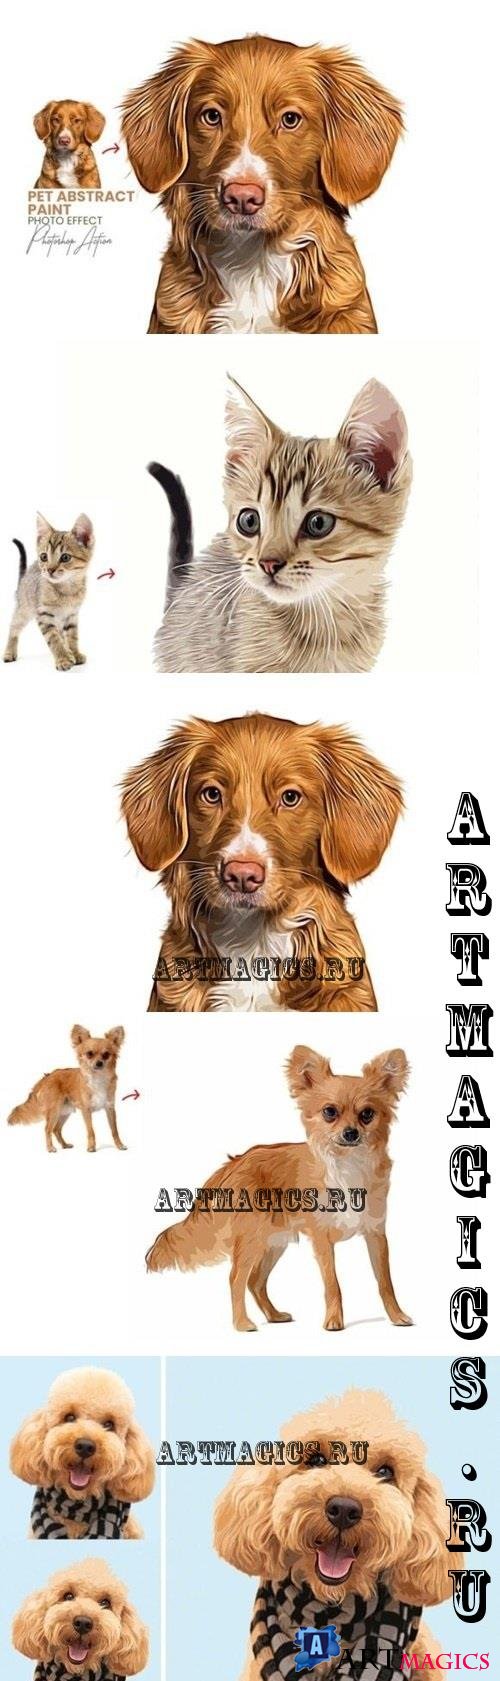 Pet Abstract Paint Photoshop Action - 92045723